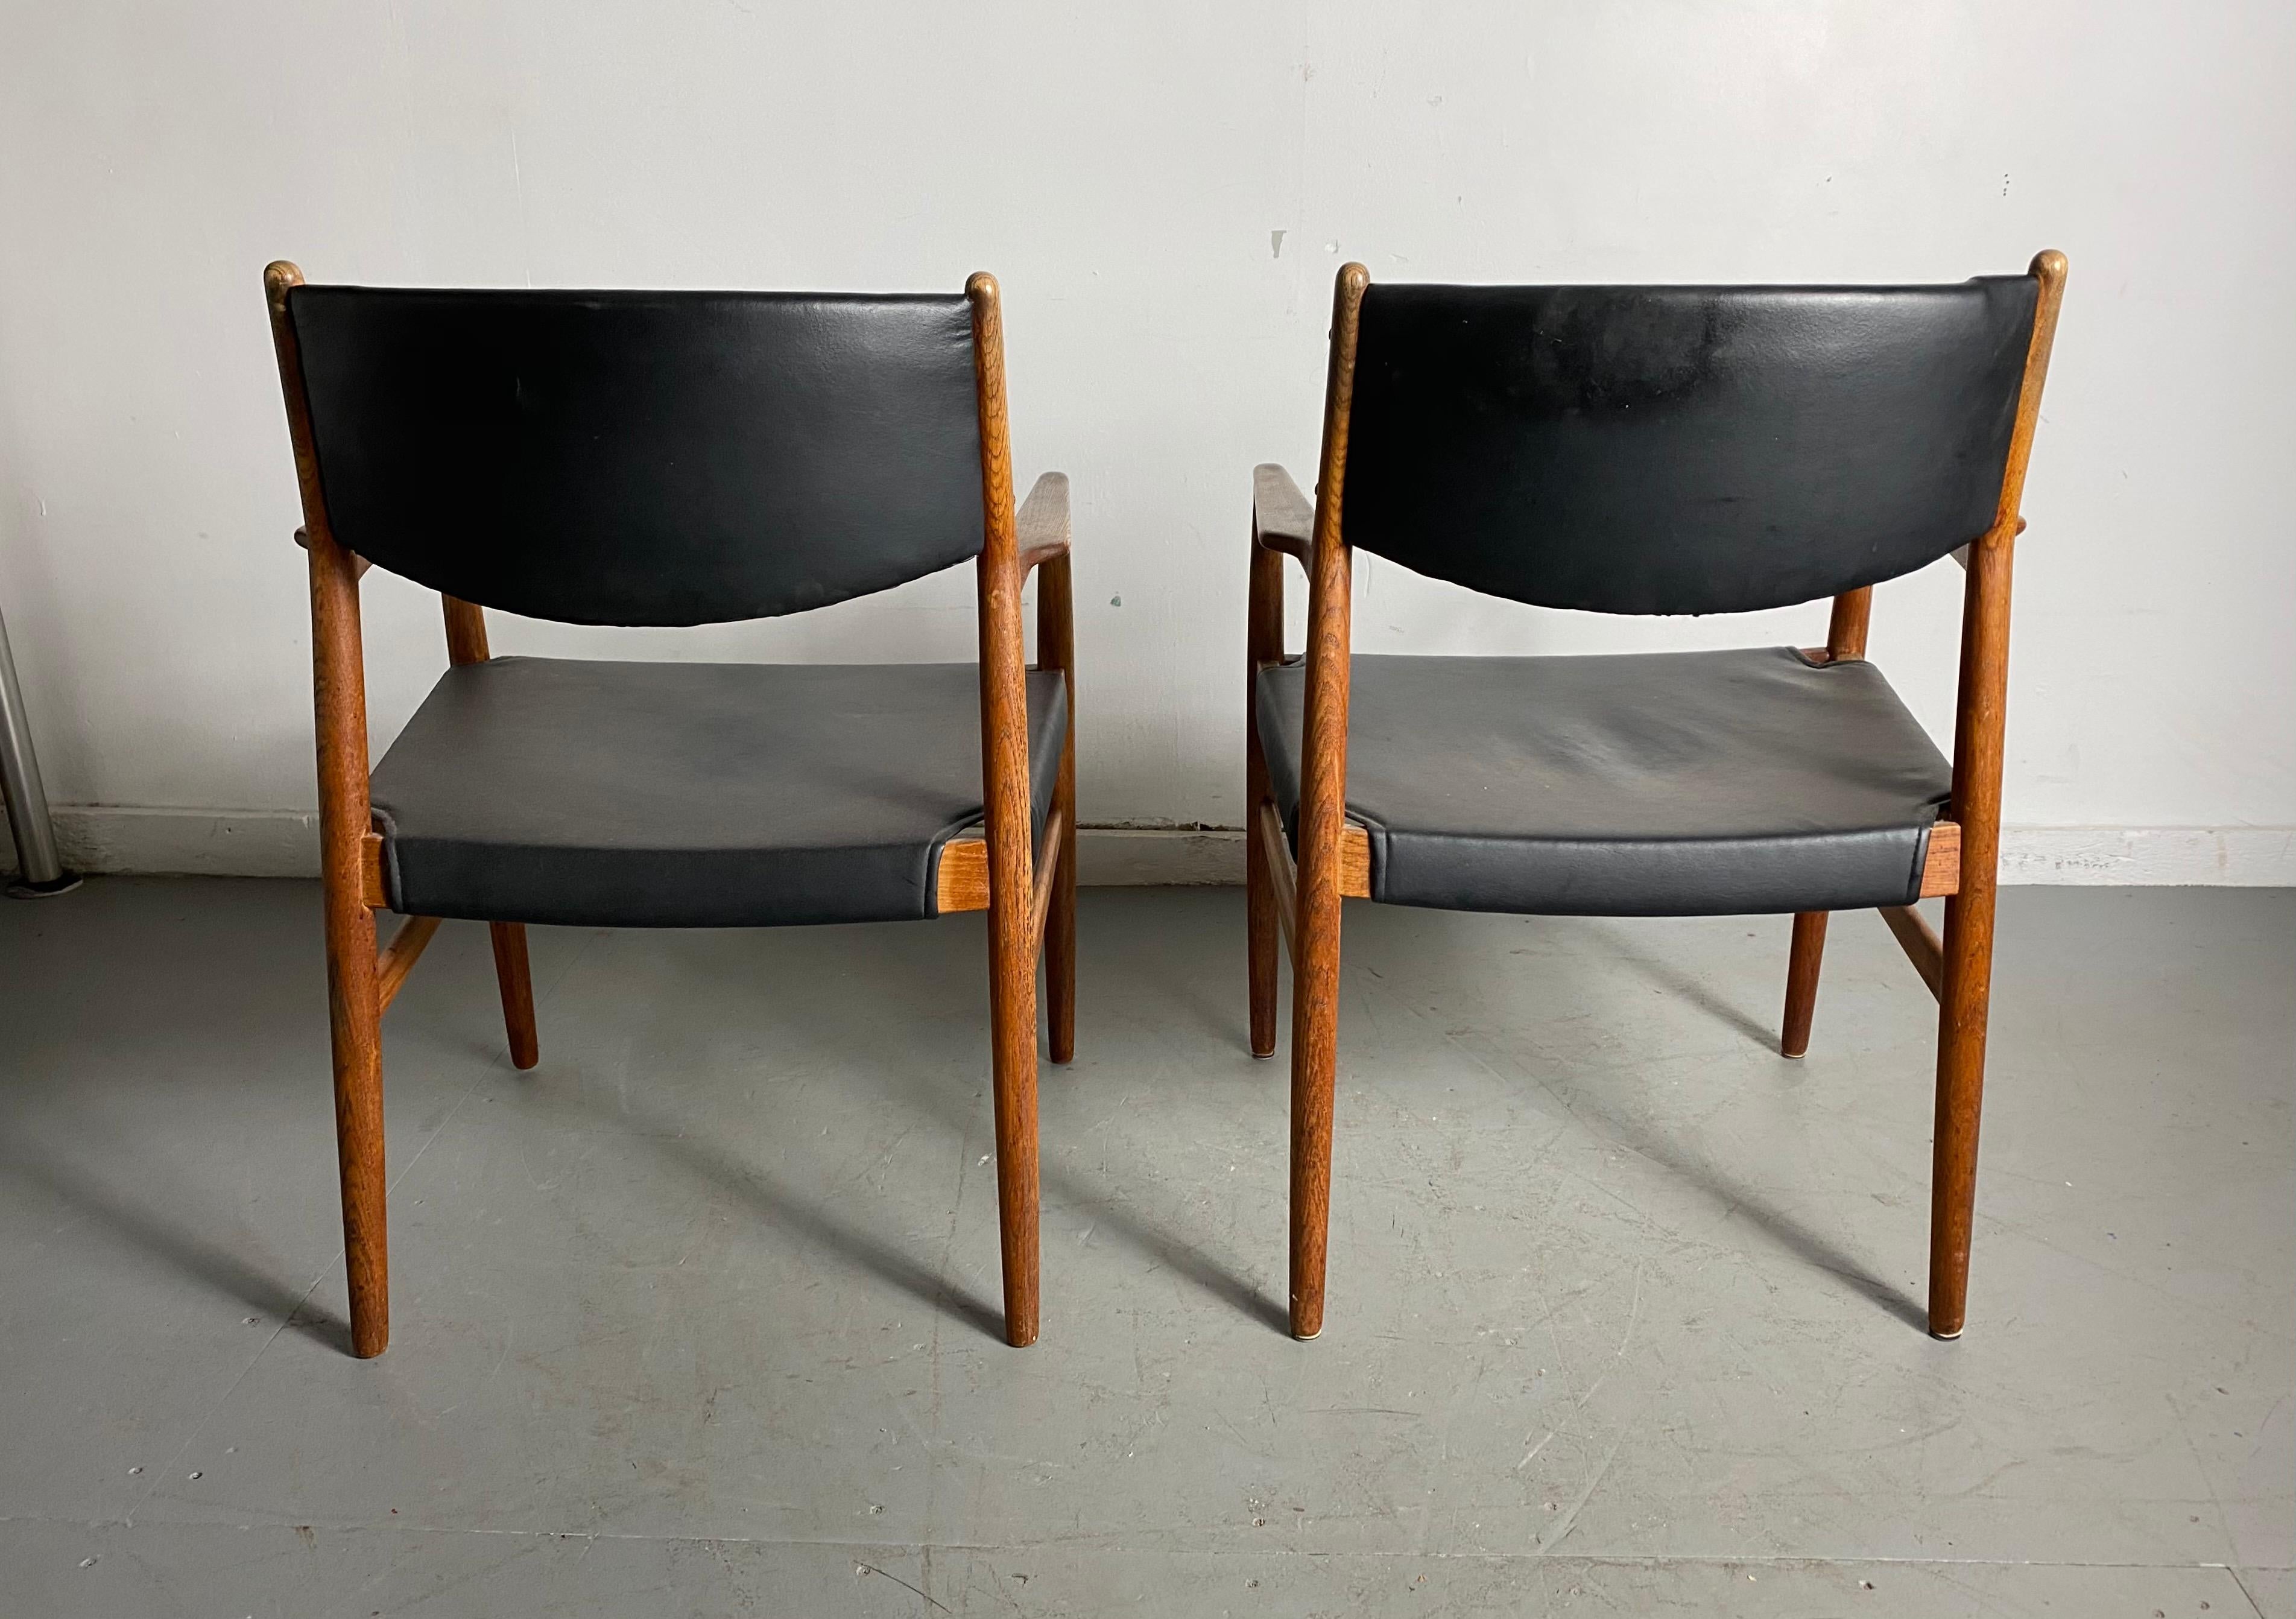 Classic Danish Armchairs in Solid Oak by Knud Andersen, J.C.A. Jensen In Good Condition For Sale In Buffalo, NY